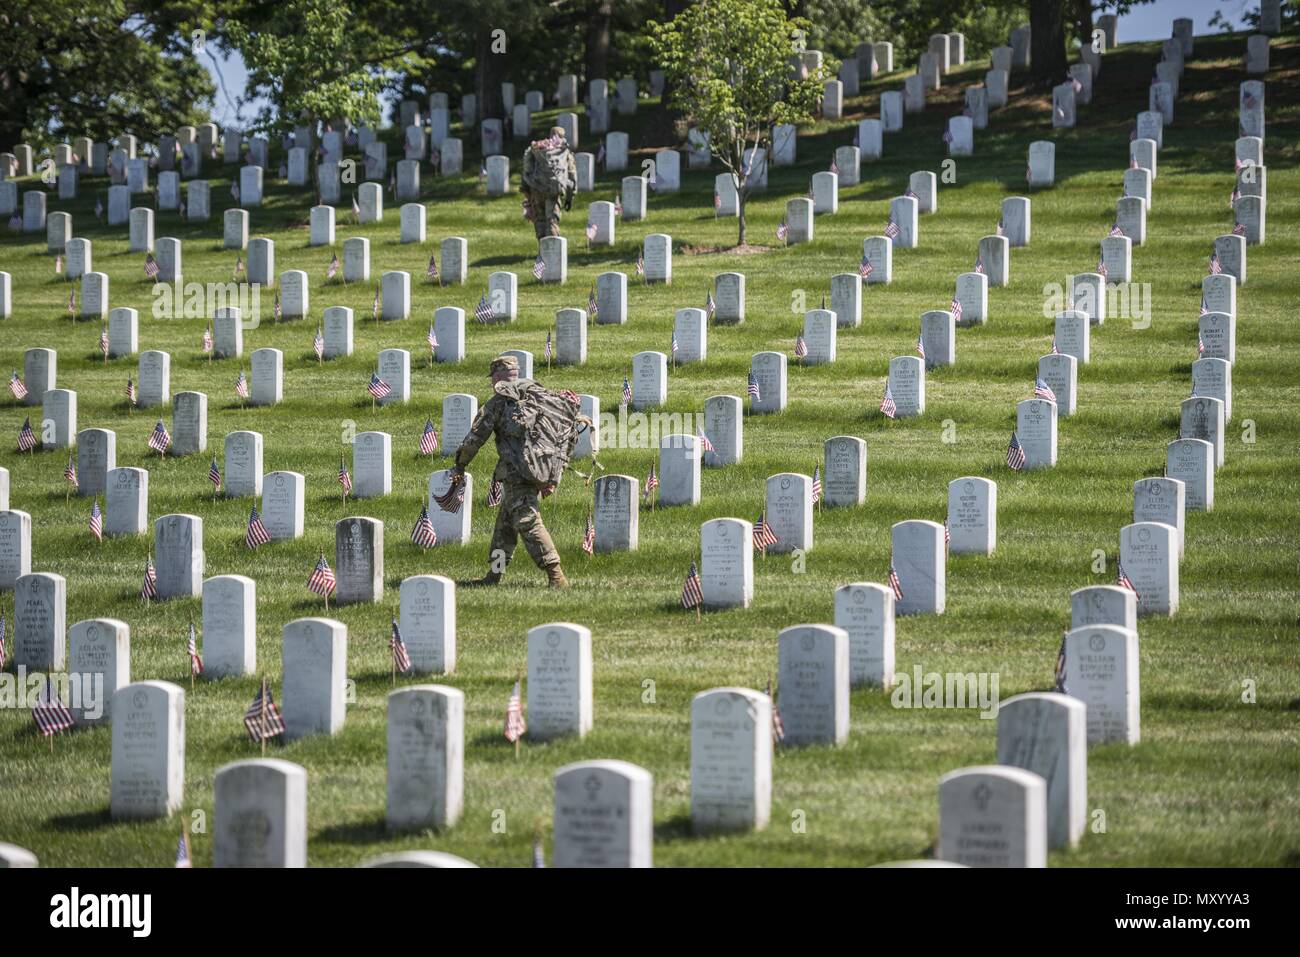 Soldiers from the 3d U.S. Infantry Regiment (The Old Guard) place U.S. flags at headstones in Section 38 during Flags In at Arlington National Cemetery, Arlington, Virginia, May 24, 2018, May 24, 2018. For more than 60 years, Soldiers from the Old Guard have honored our nation's fallen heroes by placing U.S. flags at gravesites for service members buried at both Arlington National Cemetery and the U.S. Soldiers' and Airmen's Home National Cemetery just prior to the Memorial Day weekend. Within four hours, more than 1, 000 Soldiers placed 234, 537 flags in front of every headstone and Columbari Stock Photo